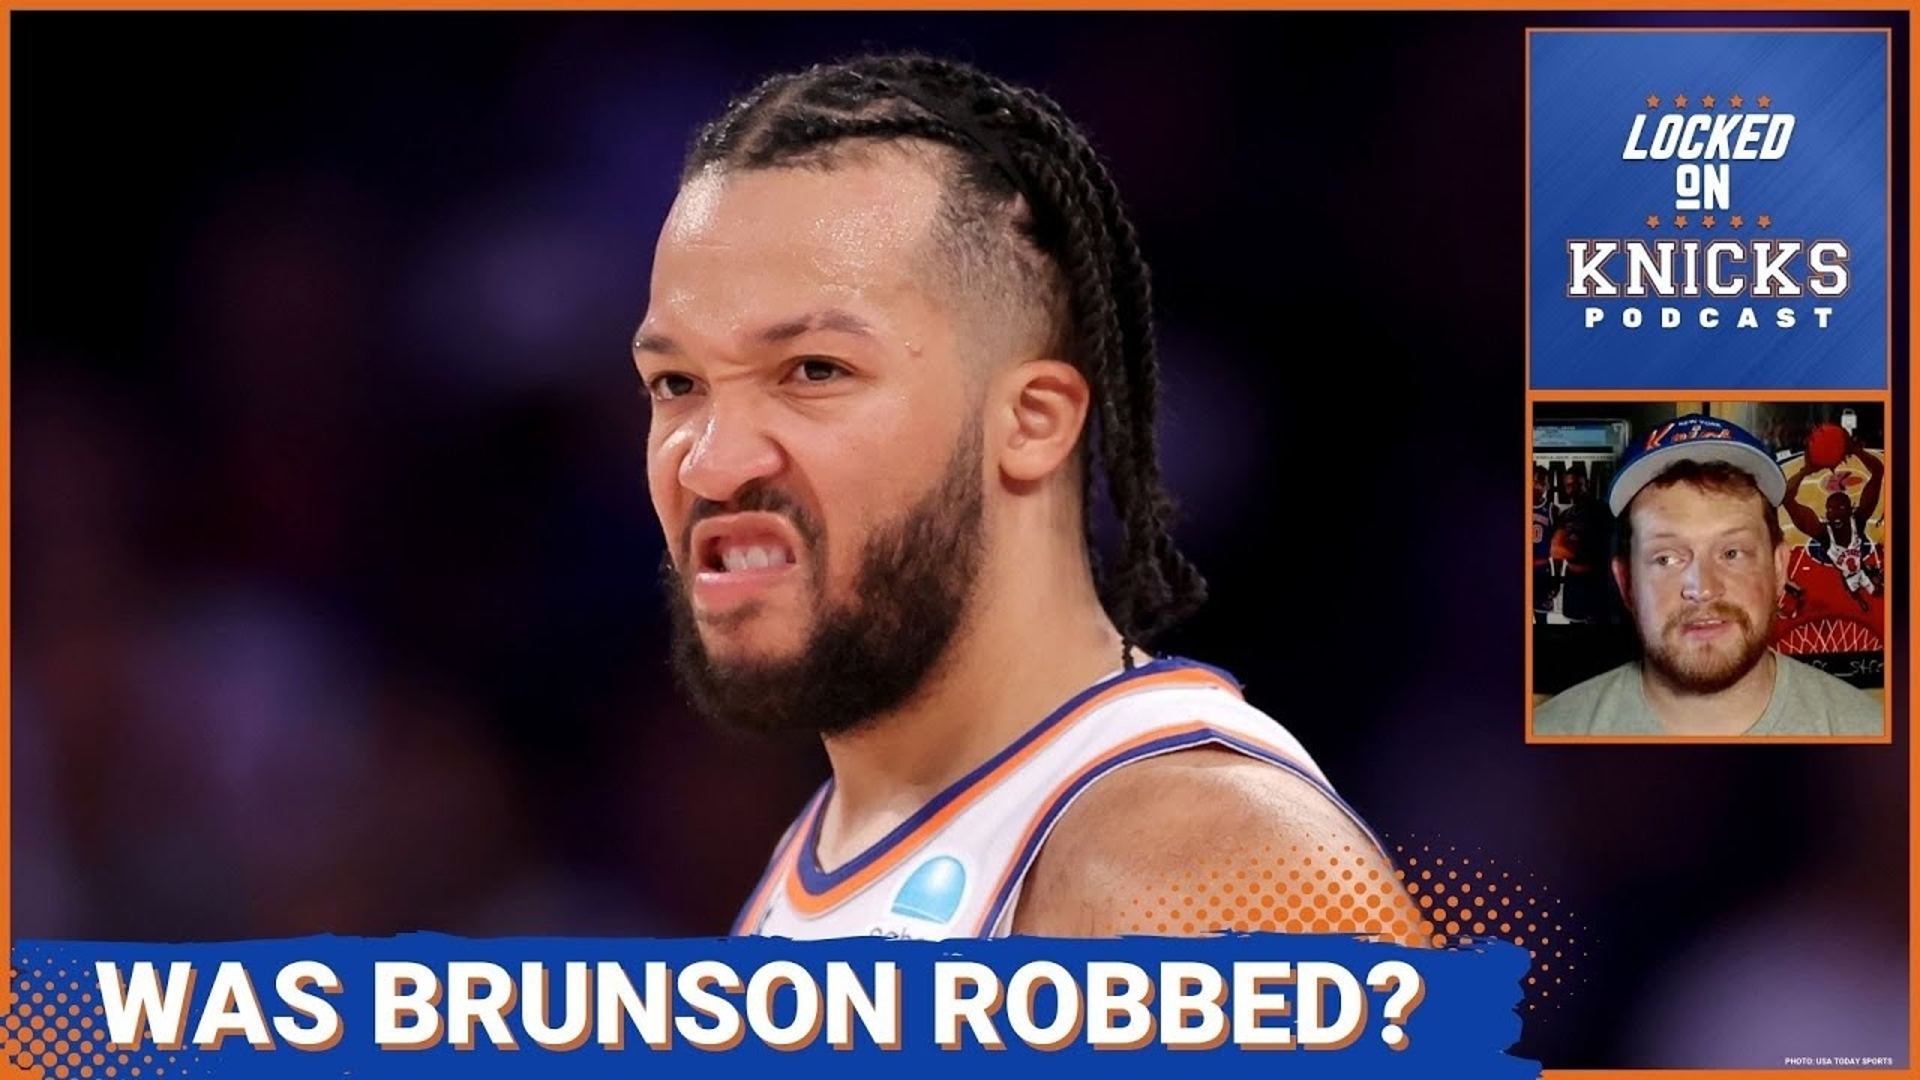 Alex goes solo to first react to the news that Jalen Brunson made the All-NBA Second Team, despite being top-5 in MVP voting by a wide margin.